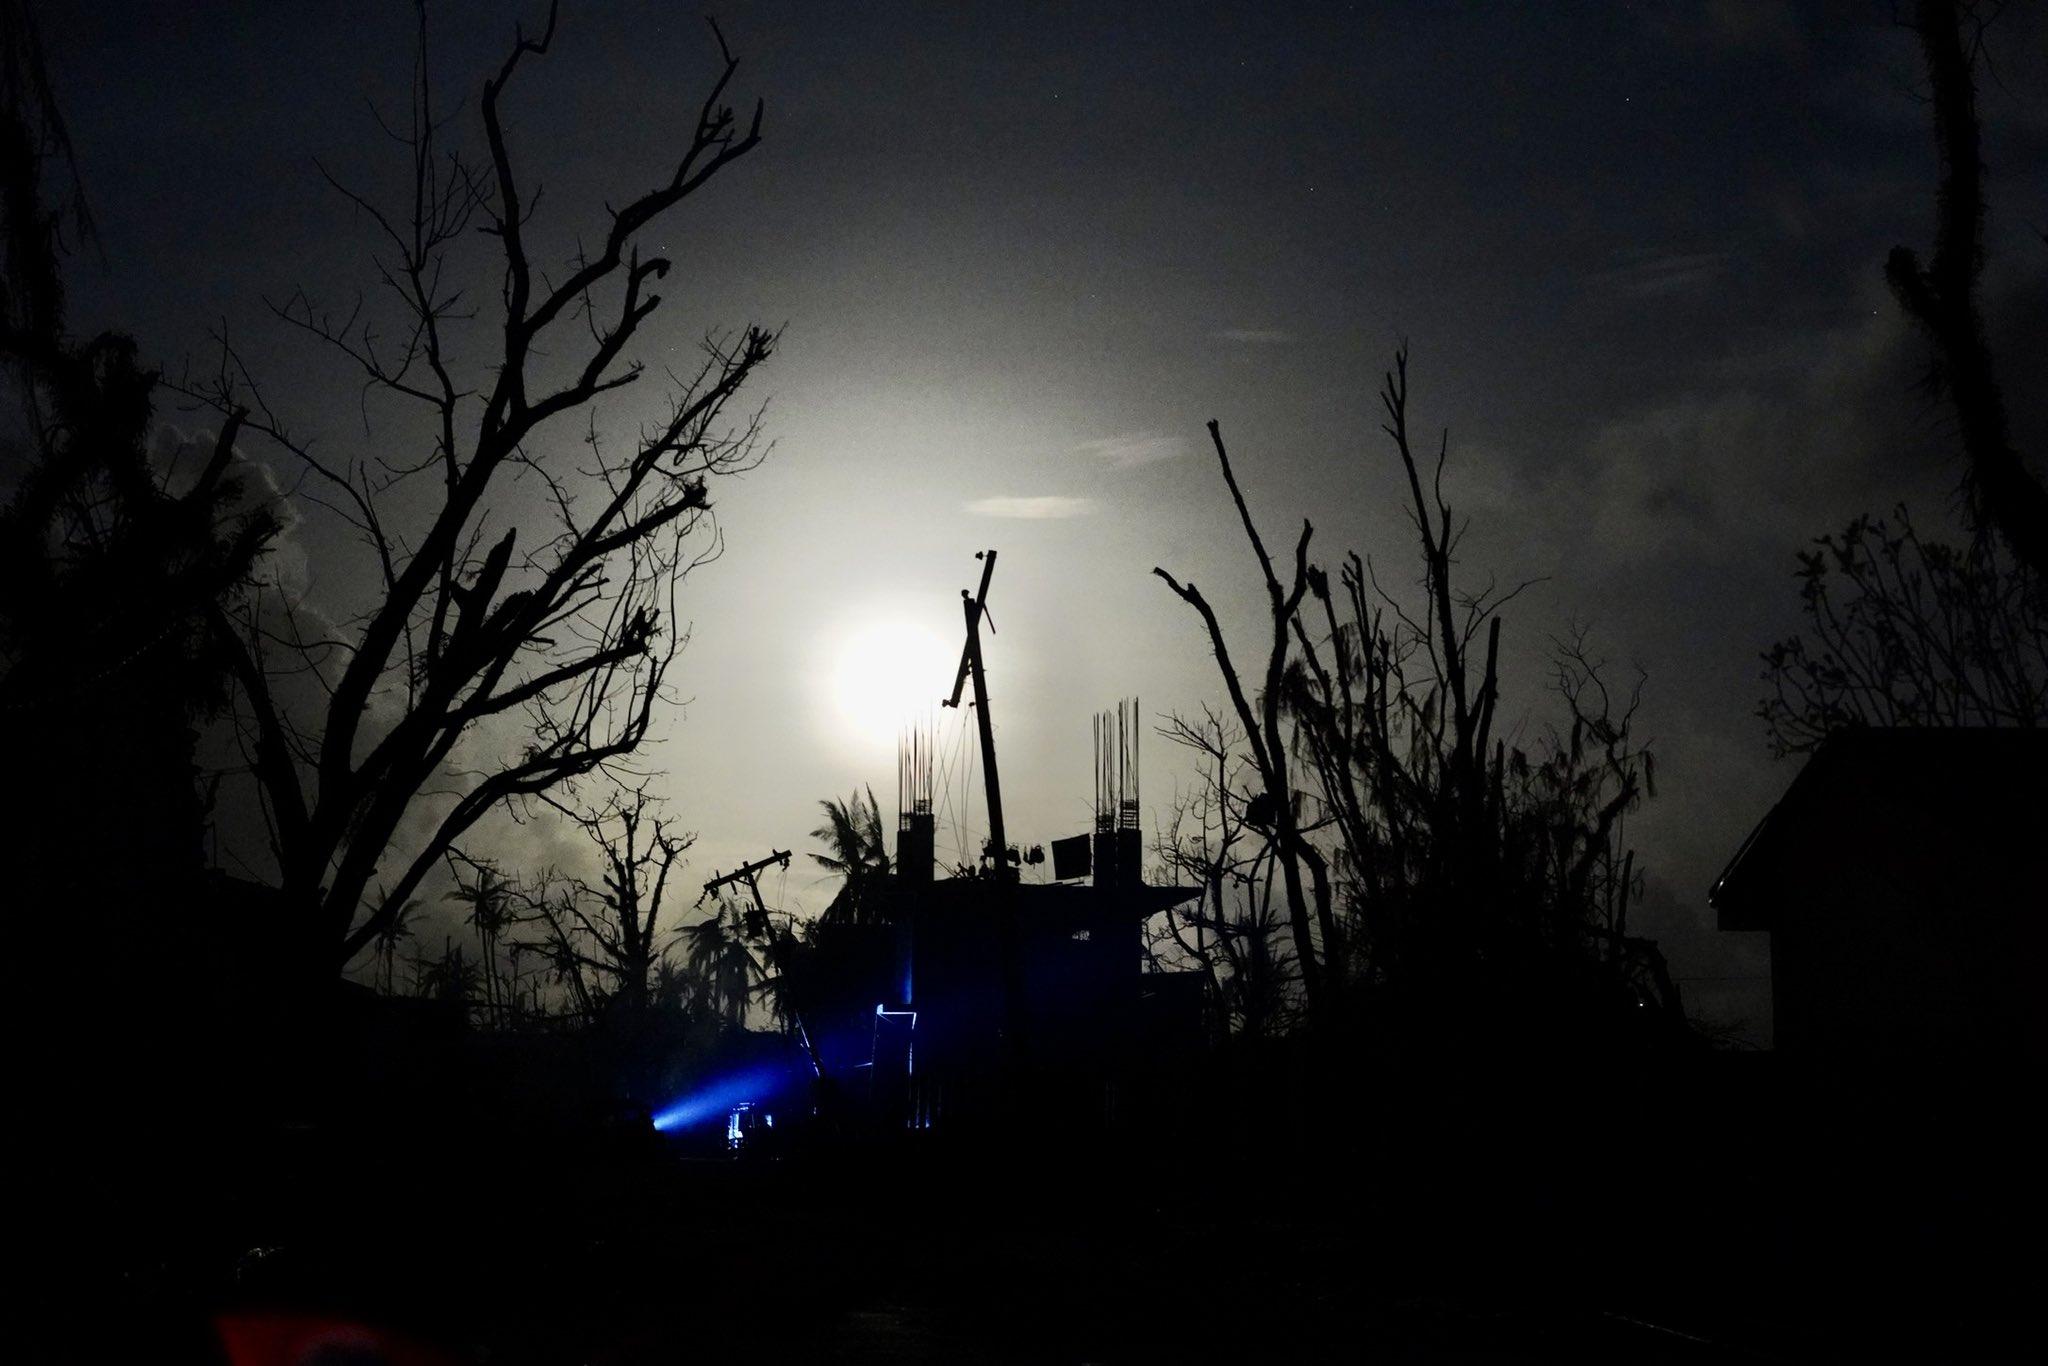 Power in Odette-hit areas may be fully restored by February —NDRRMC